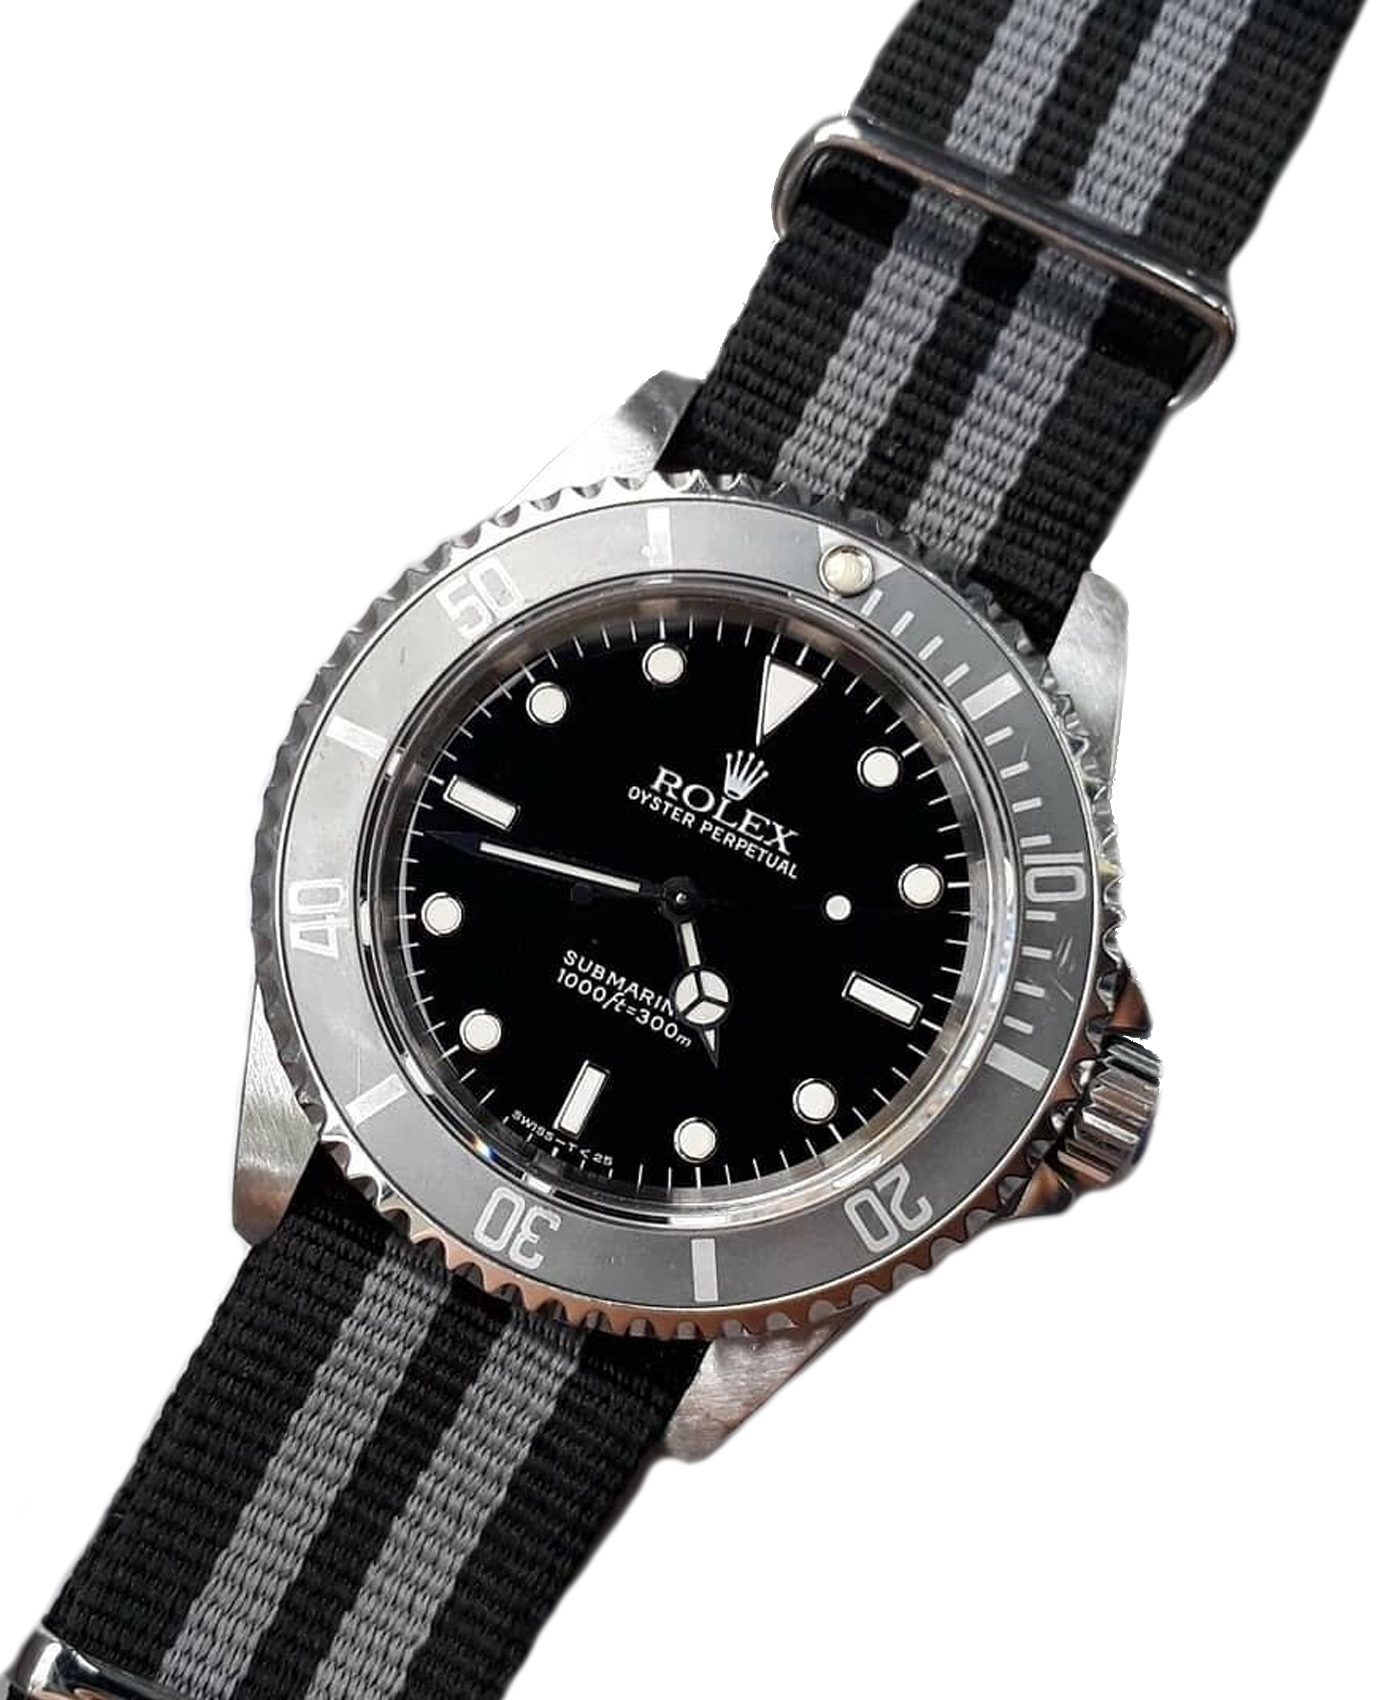 Rolex Submariner military vintage on Black and Grey striped Nato strap James Bond style